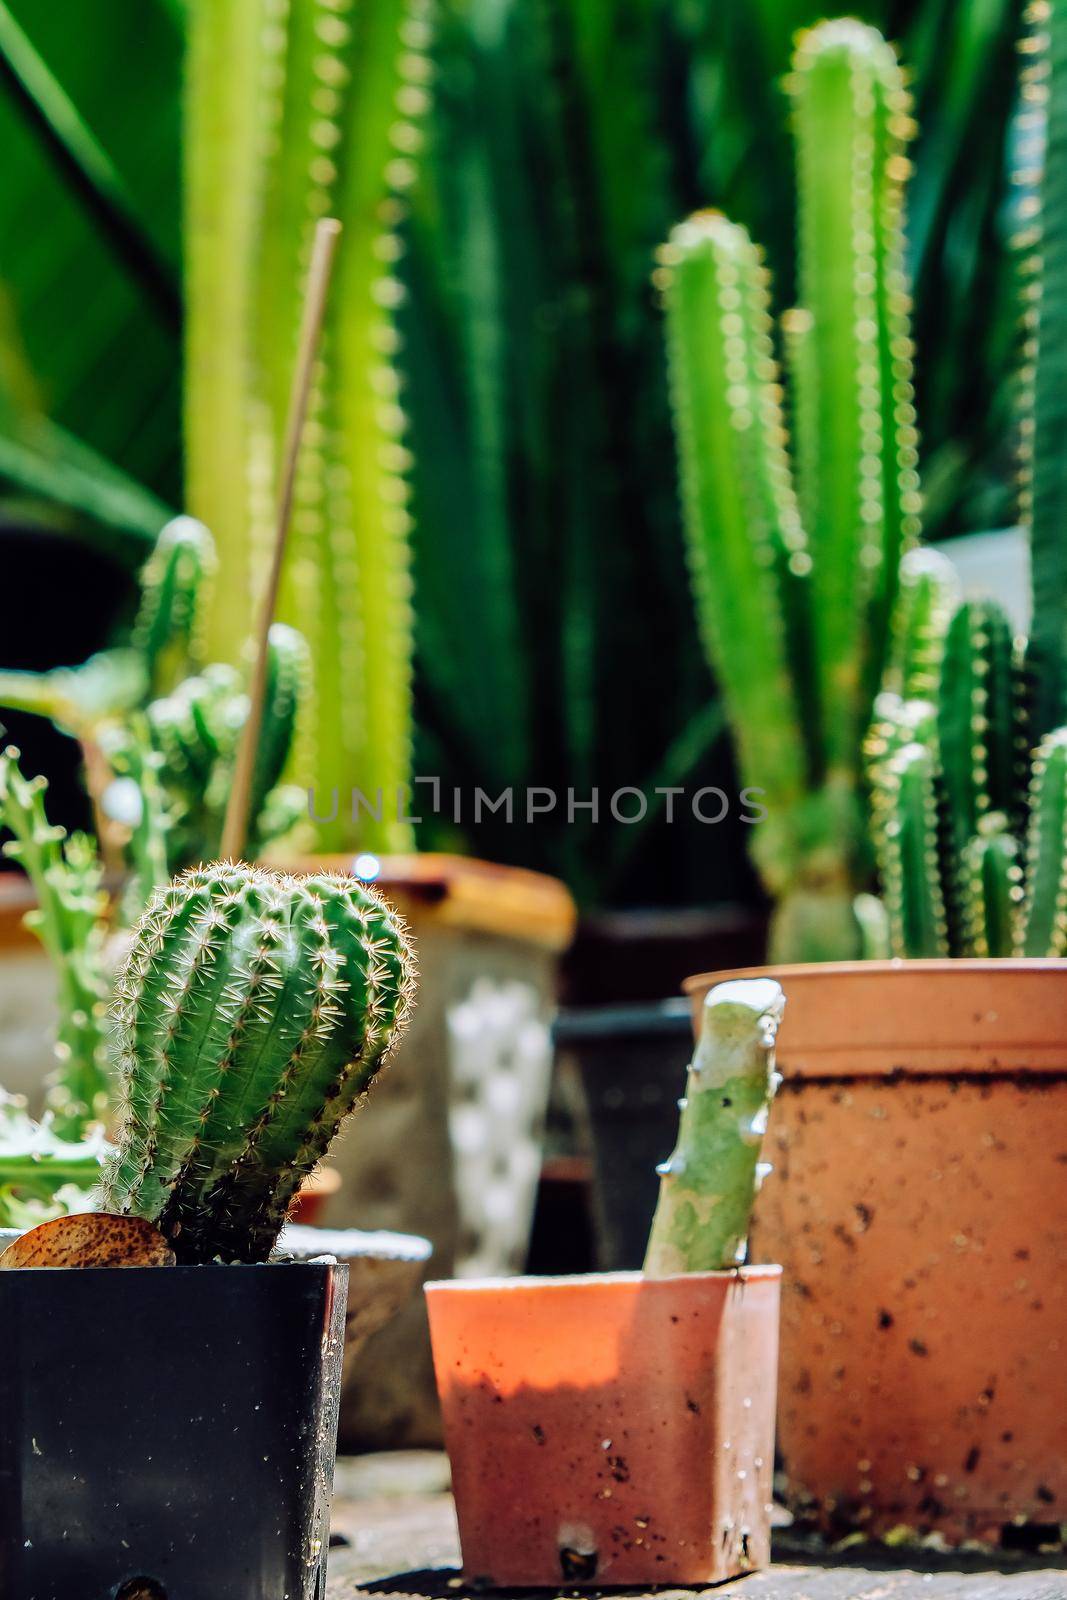 Tiny Potted Cactus. by ponsulak